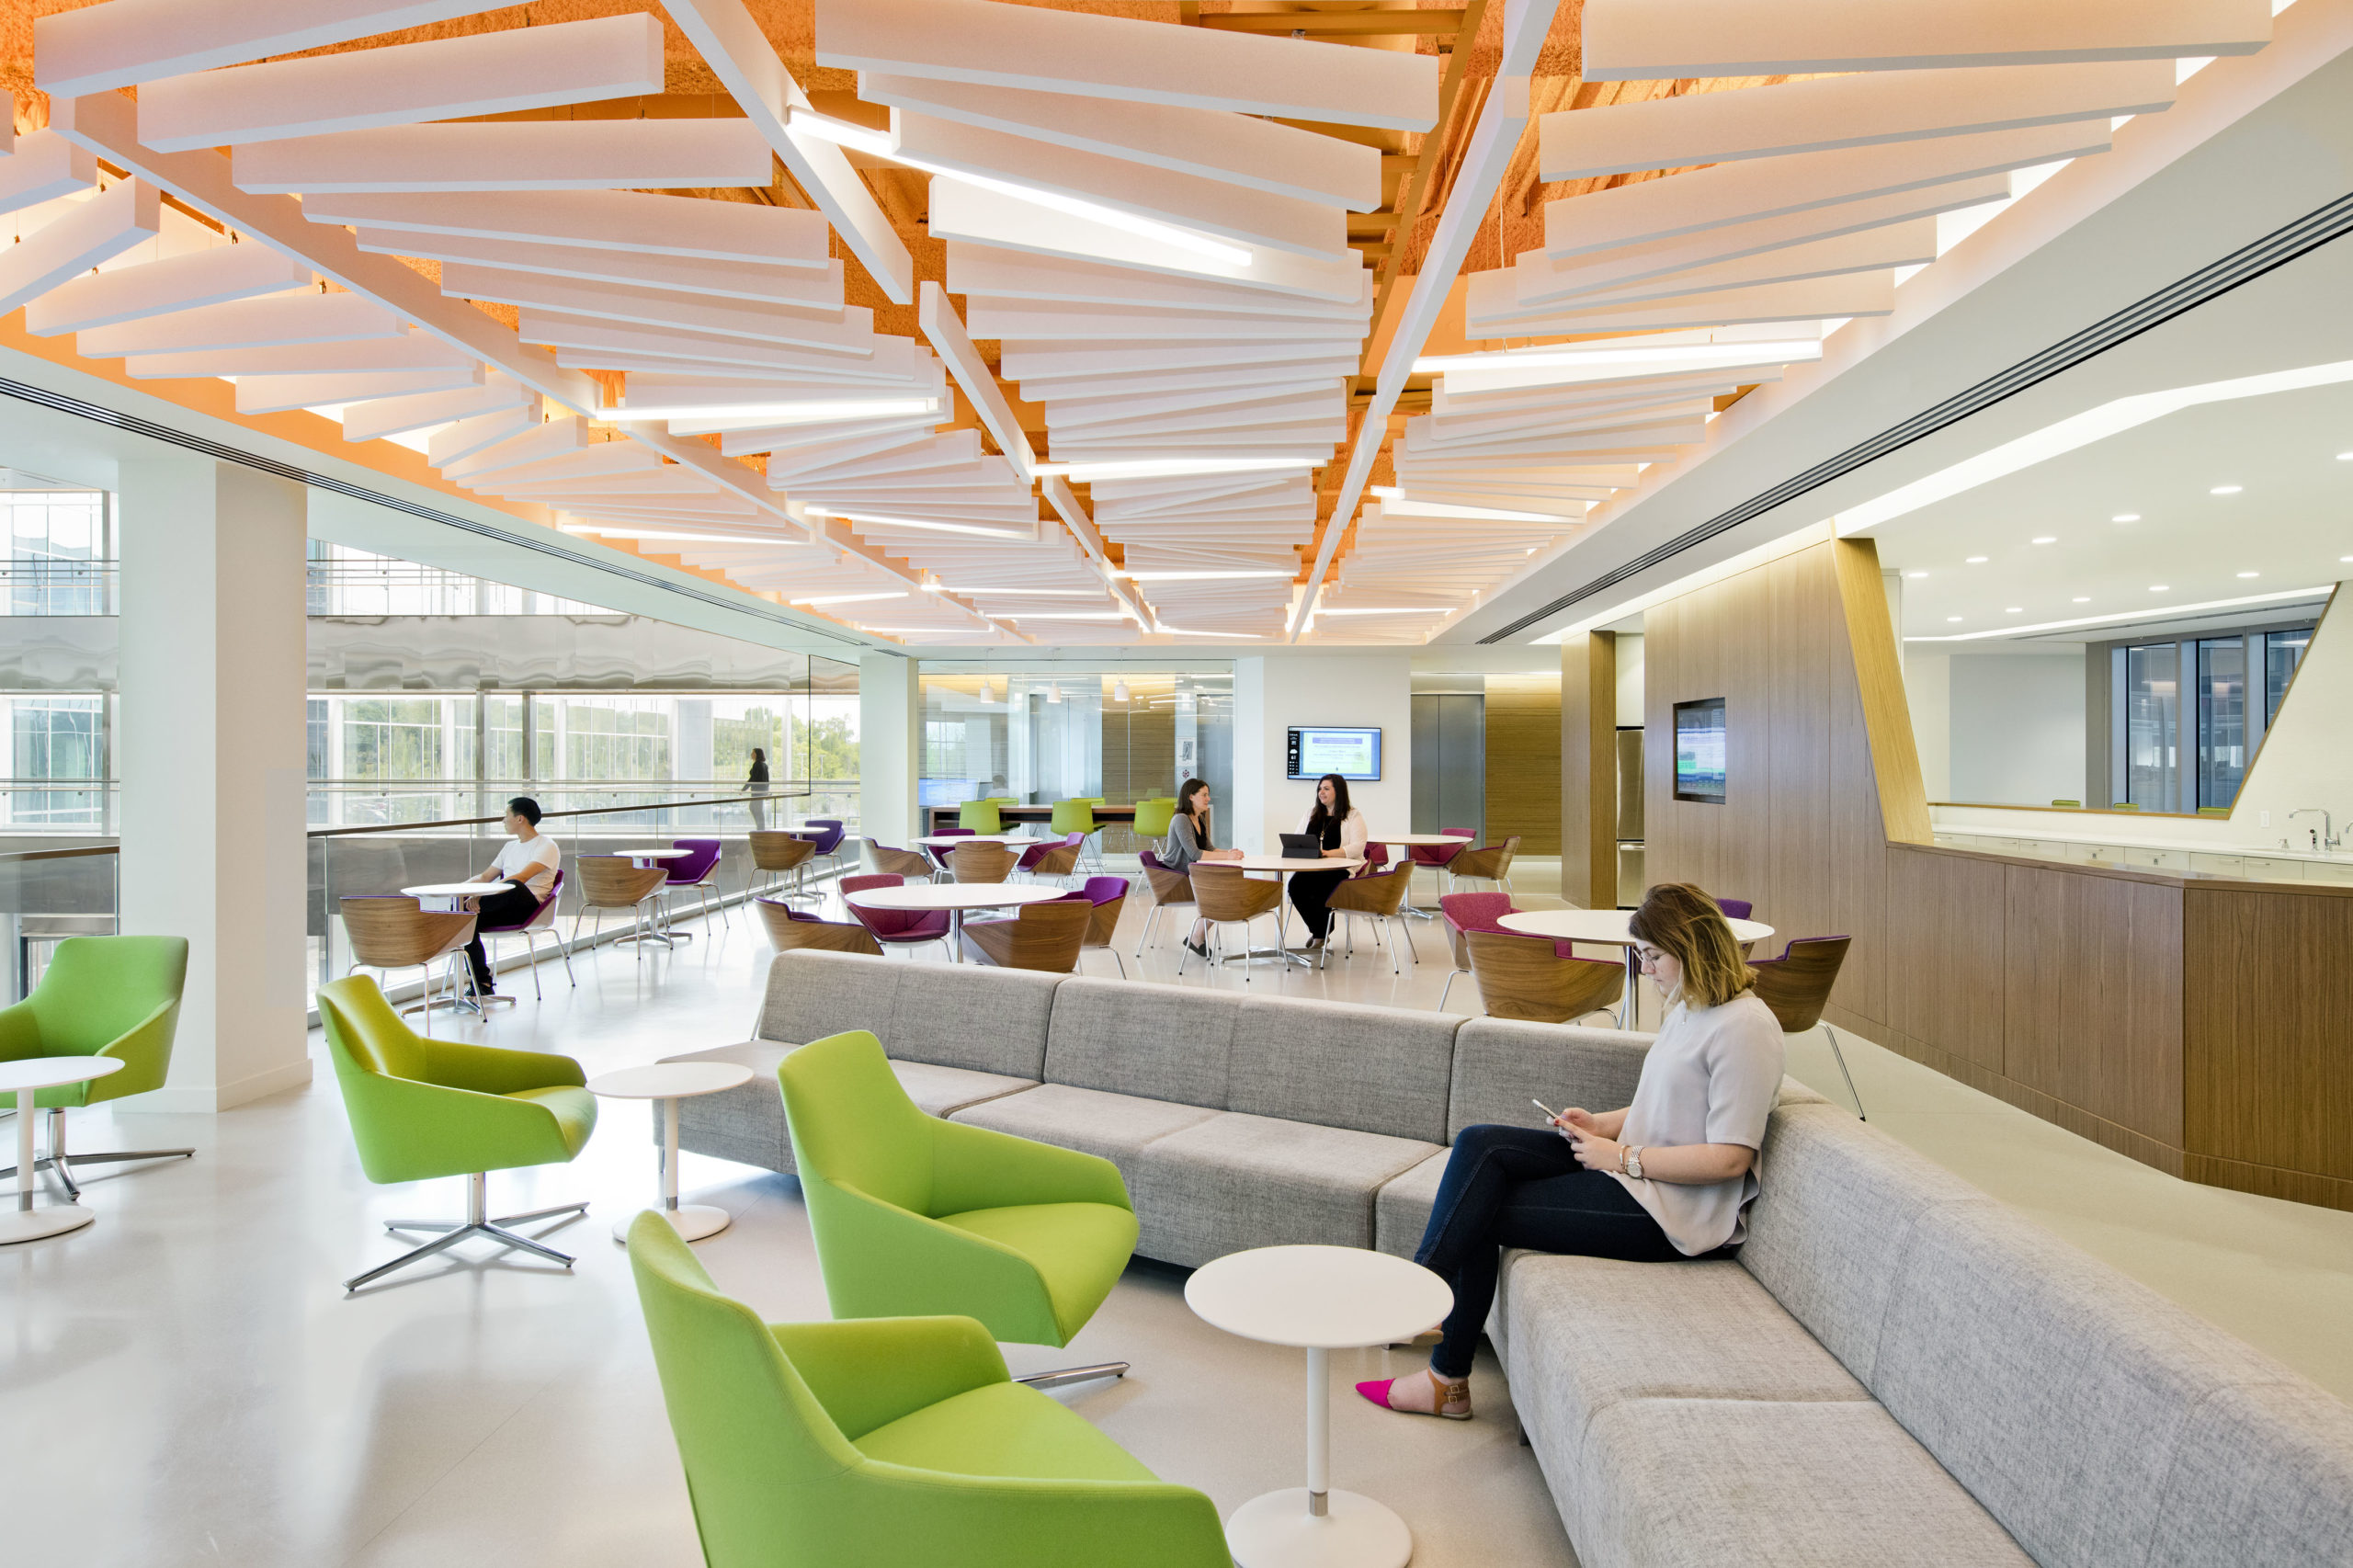 collaborative work spaces in Bristol-Myers Squibb Princeton Pike Offices